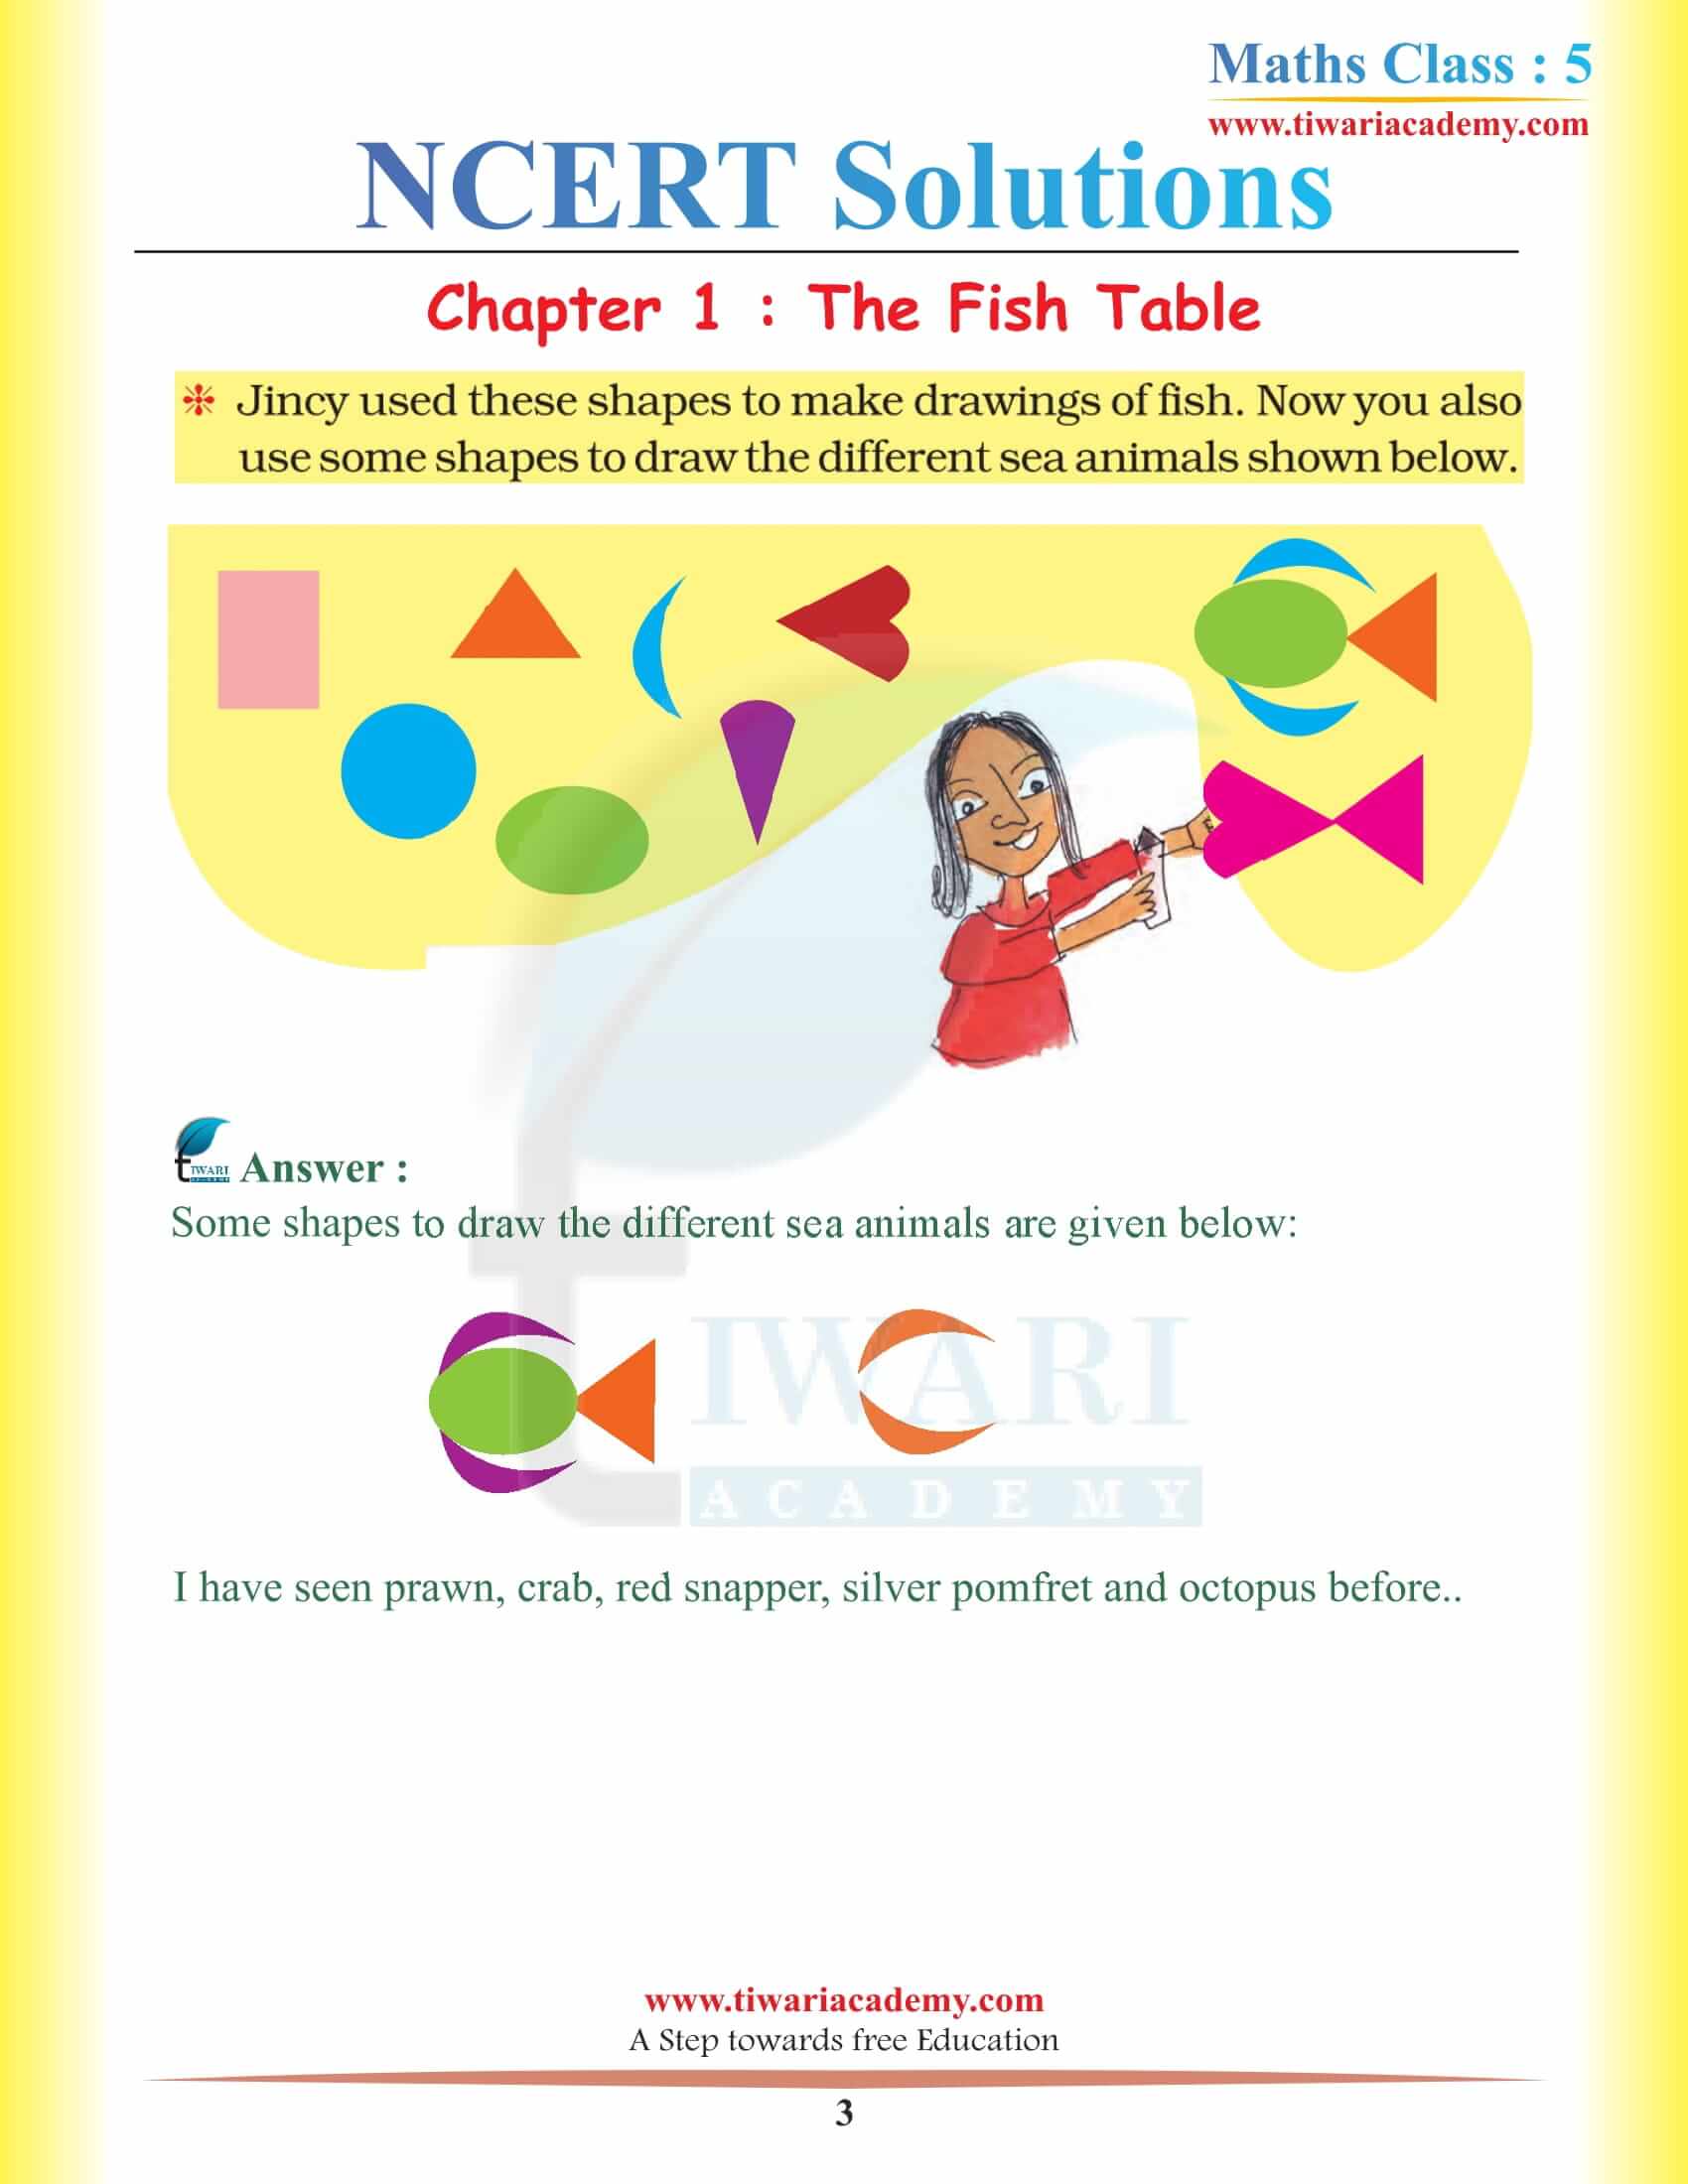 NCERT Solutions for Class 5 Maths Chapter 1 free download